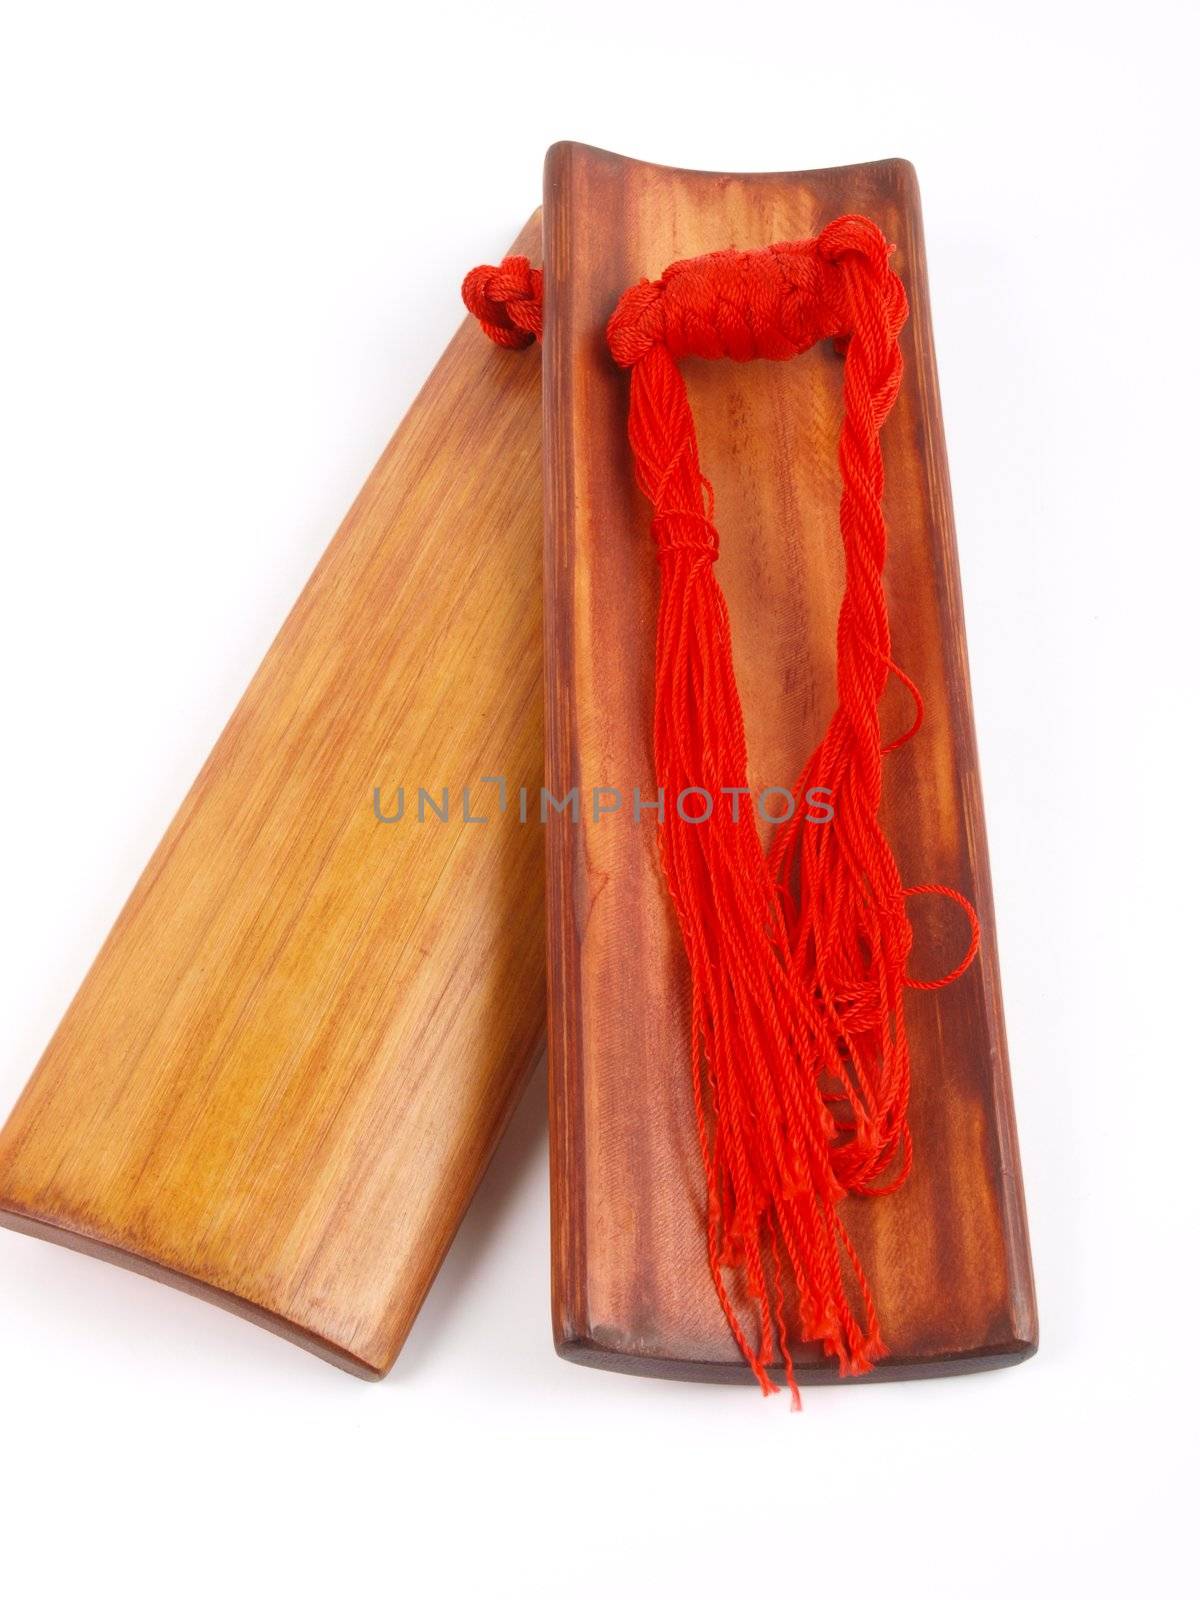 Traditional Chinese music instrument. Close up on white background